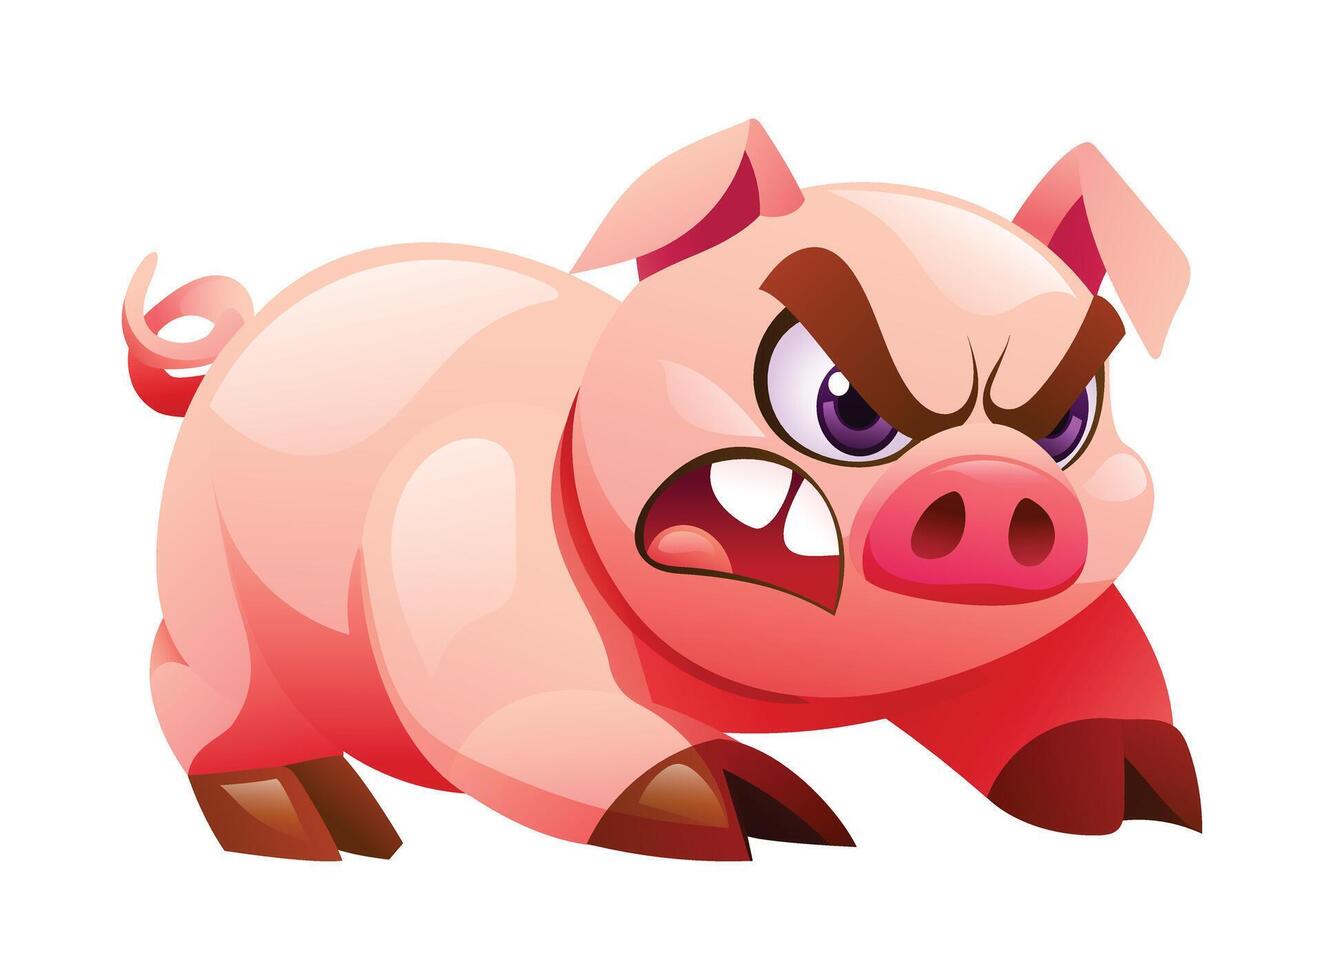 Cartoon pig in angry pose. Vector illustration isolated on white background